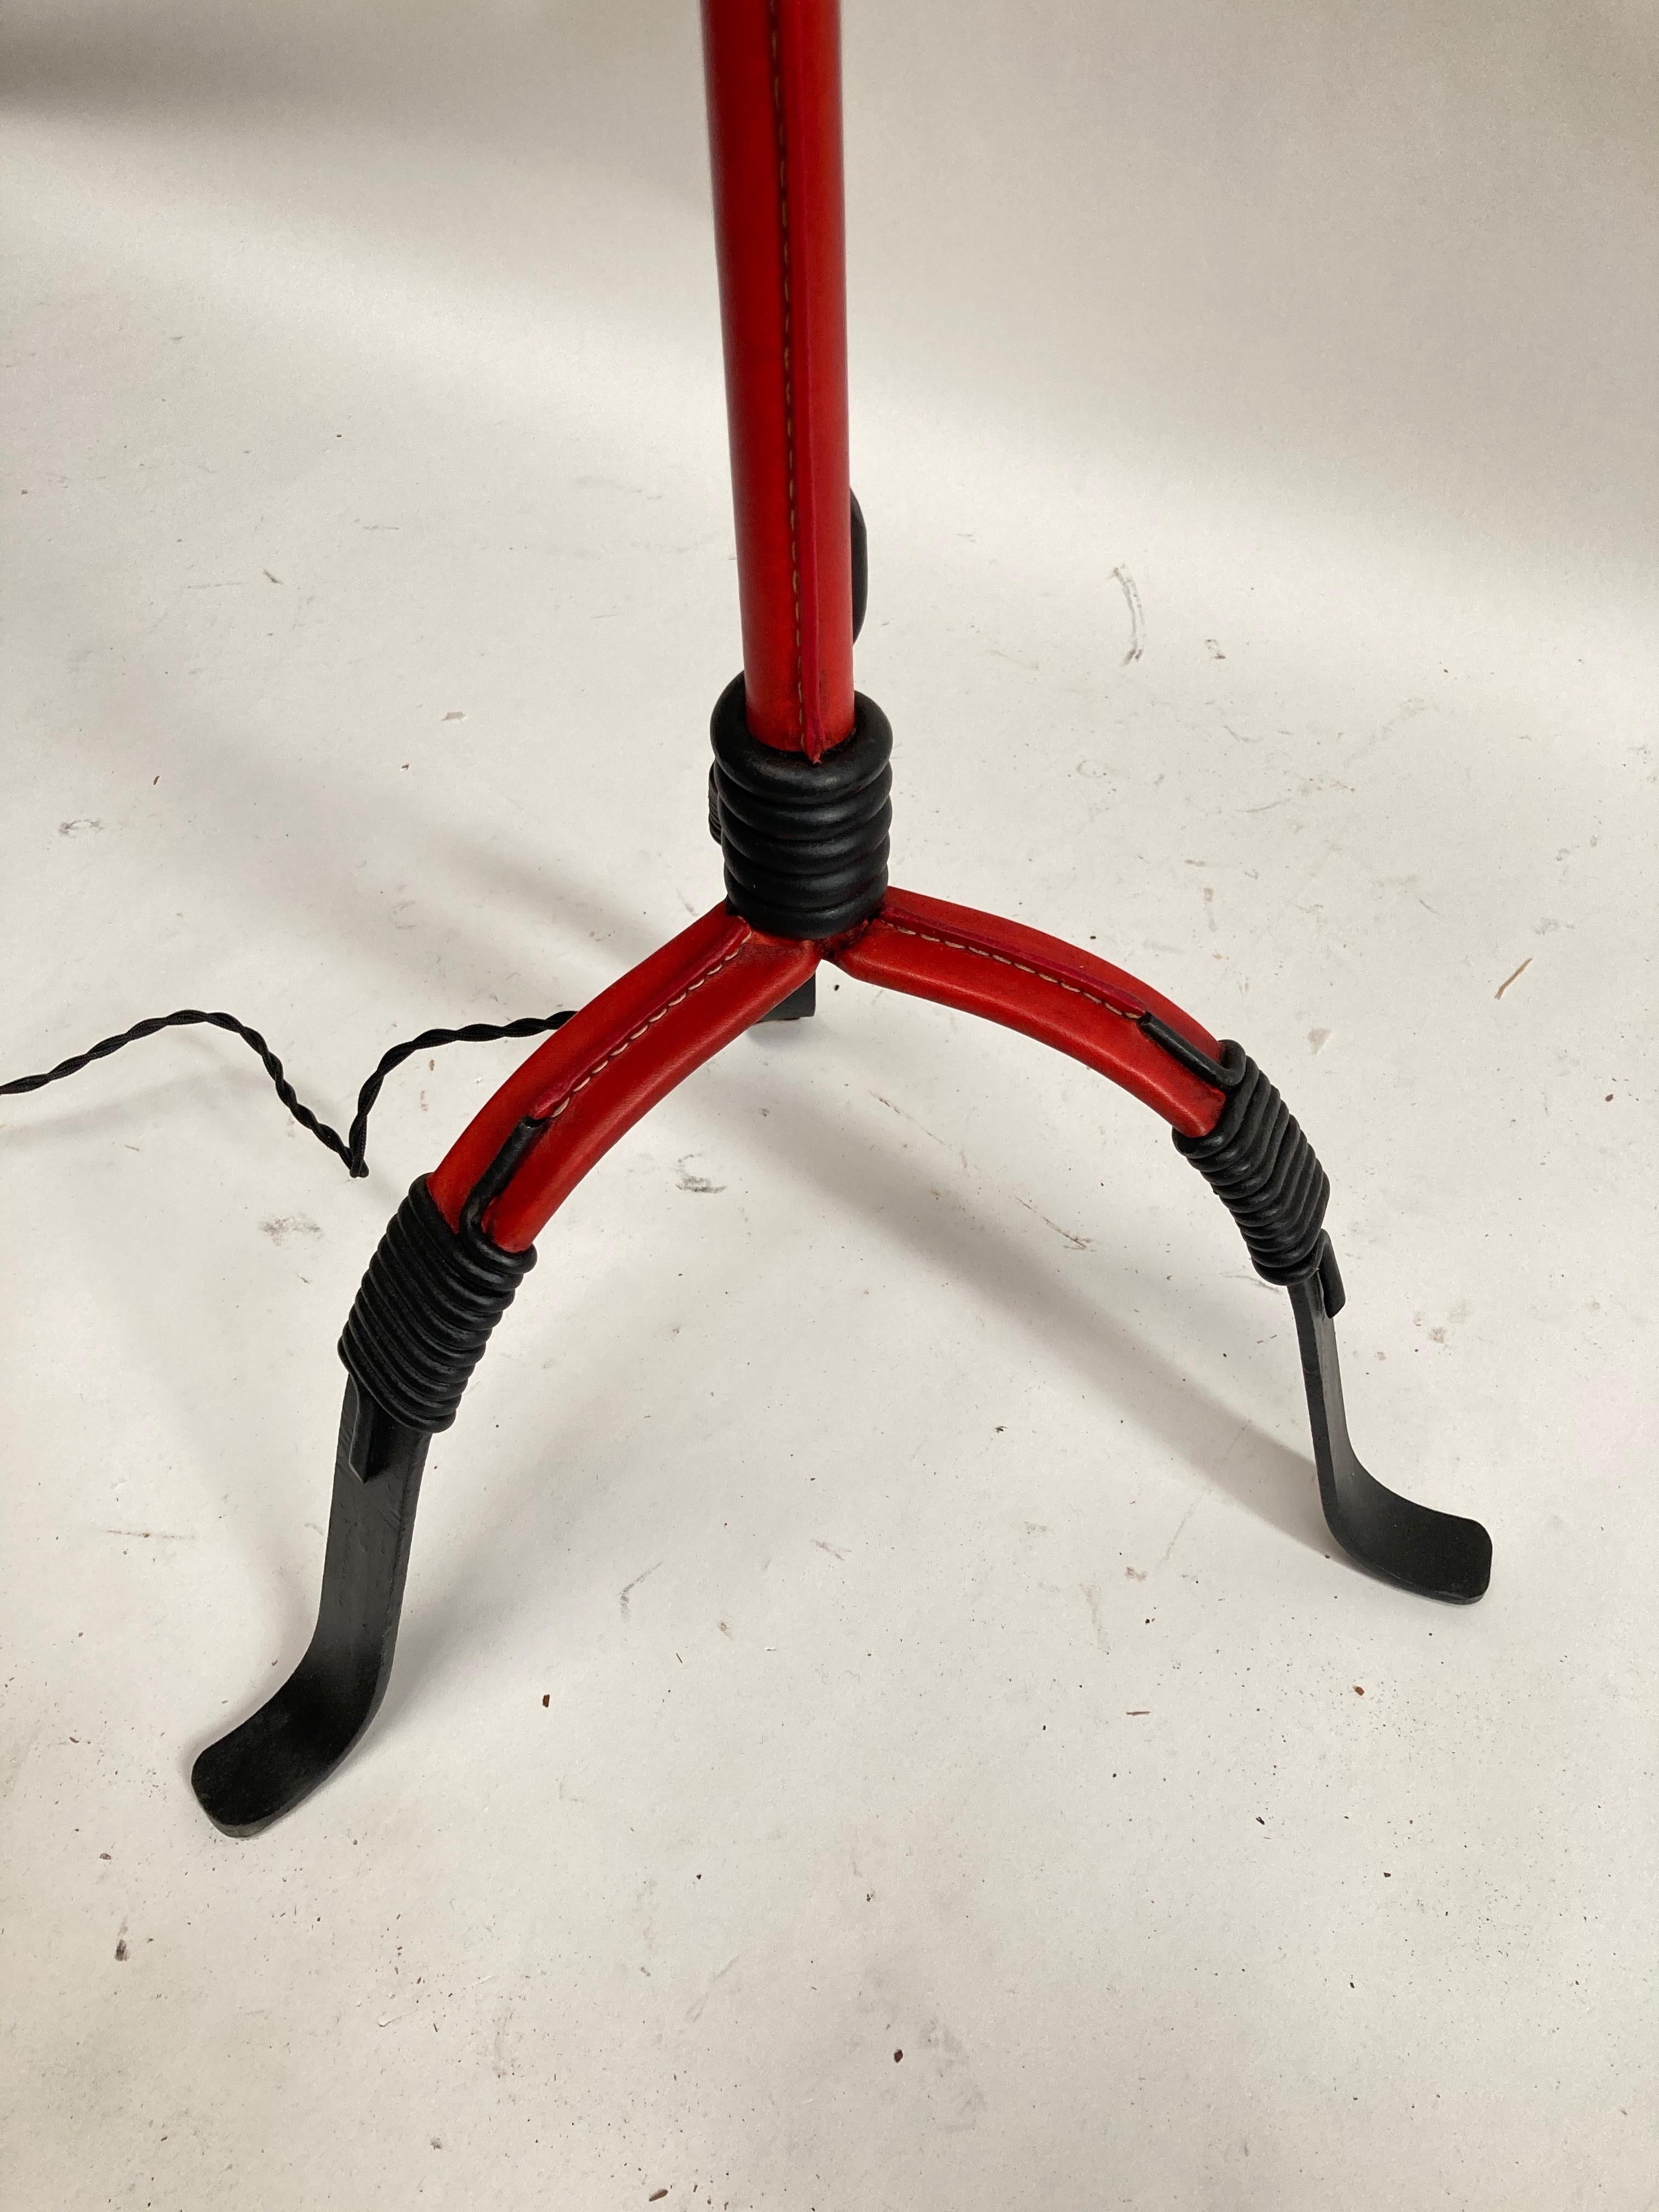 1950's Stitched leather floor lamp by Jacques Adnet
Rare in red.